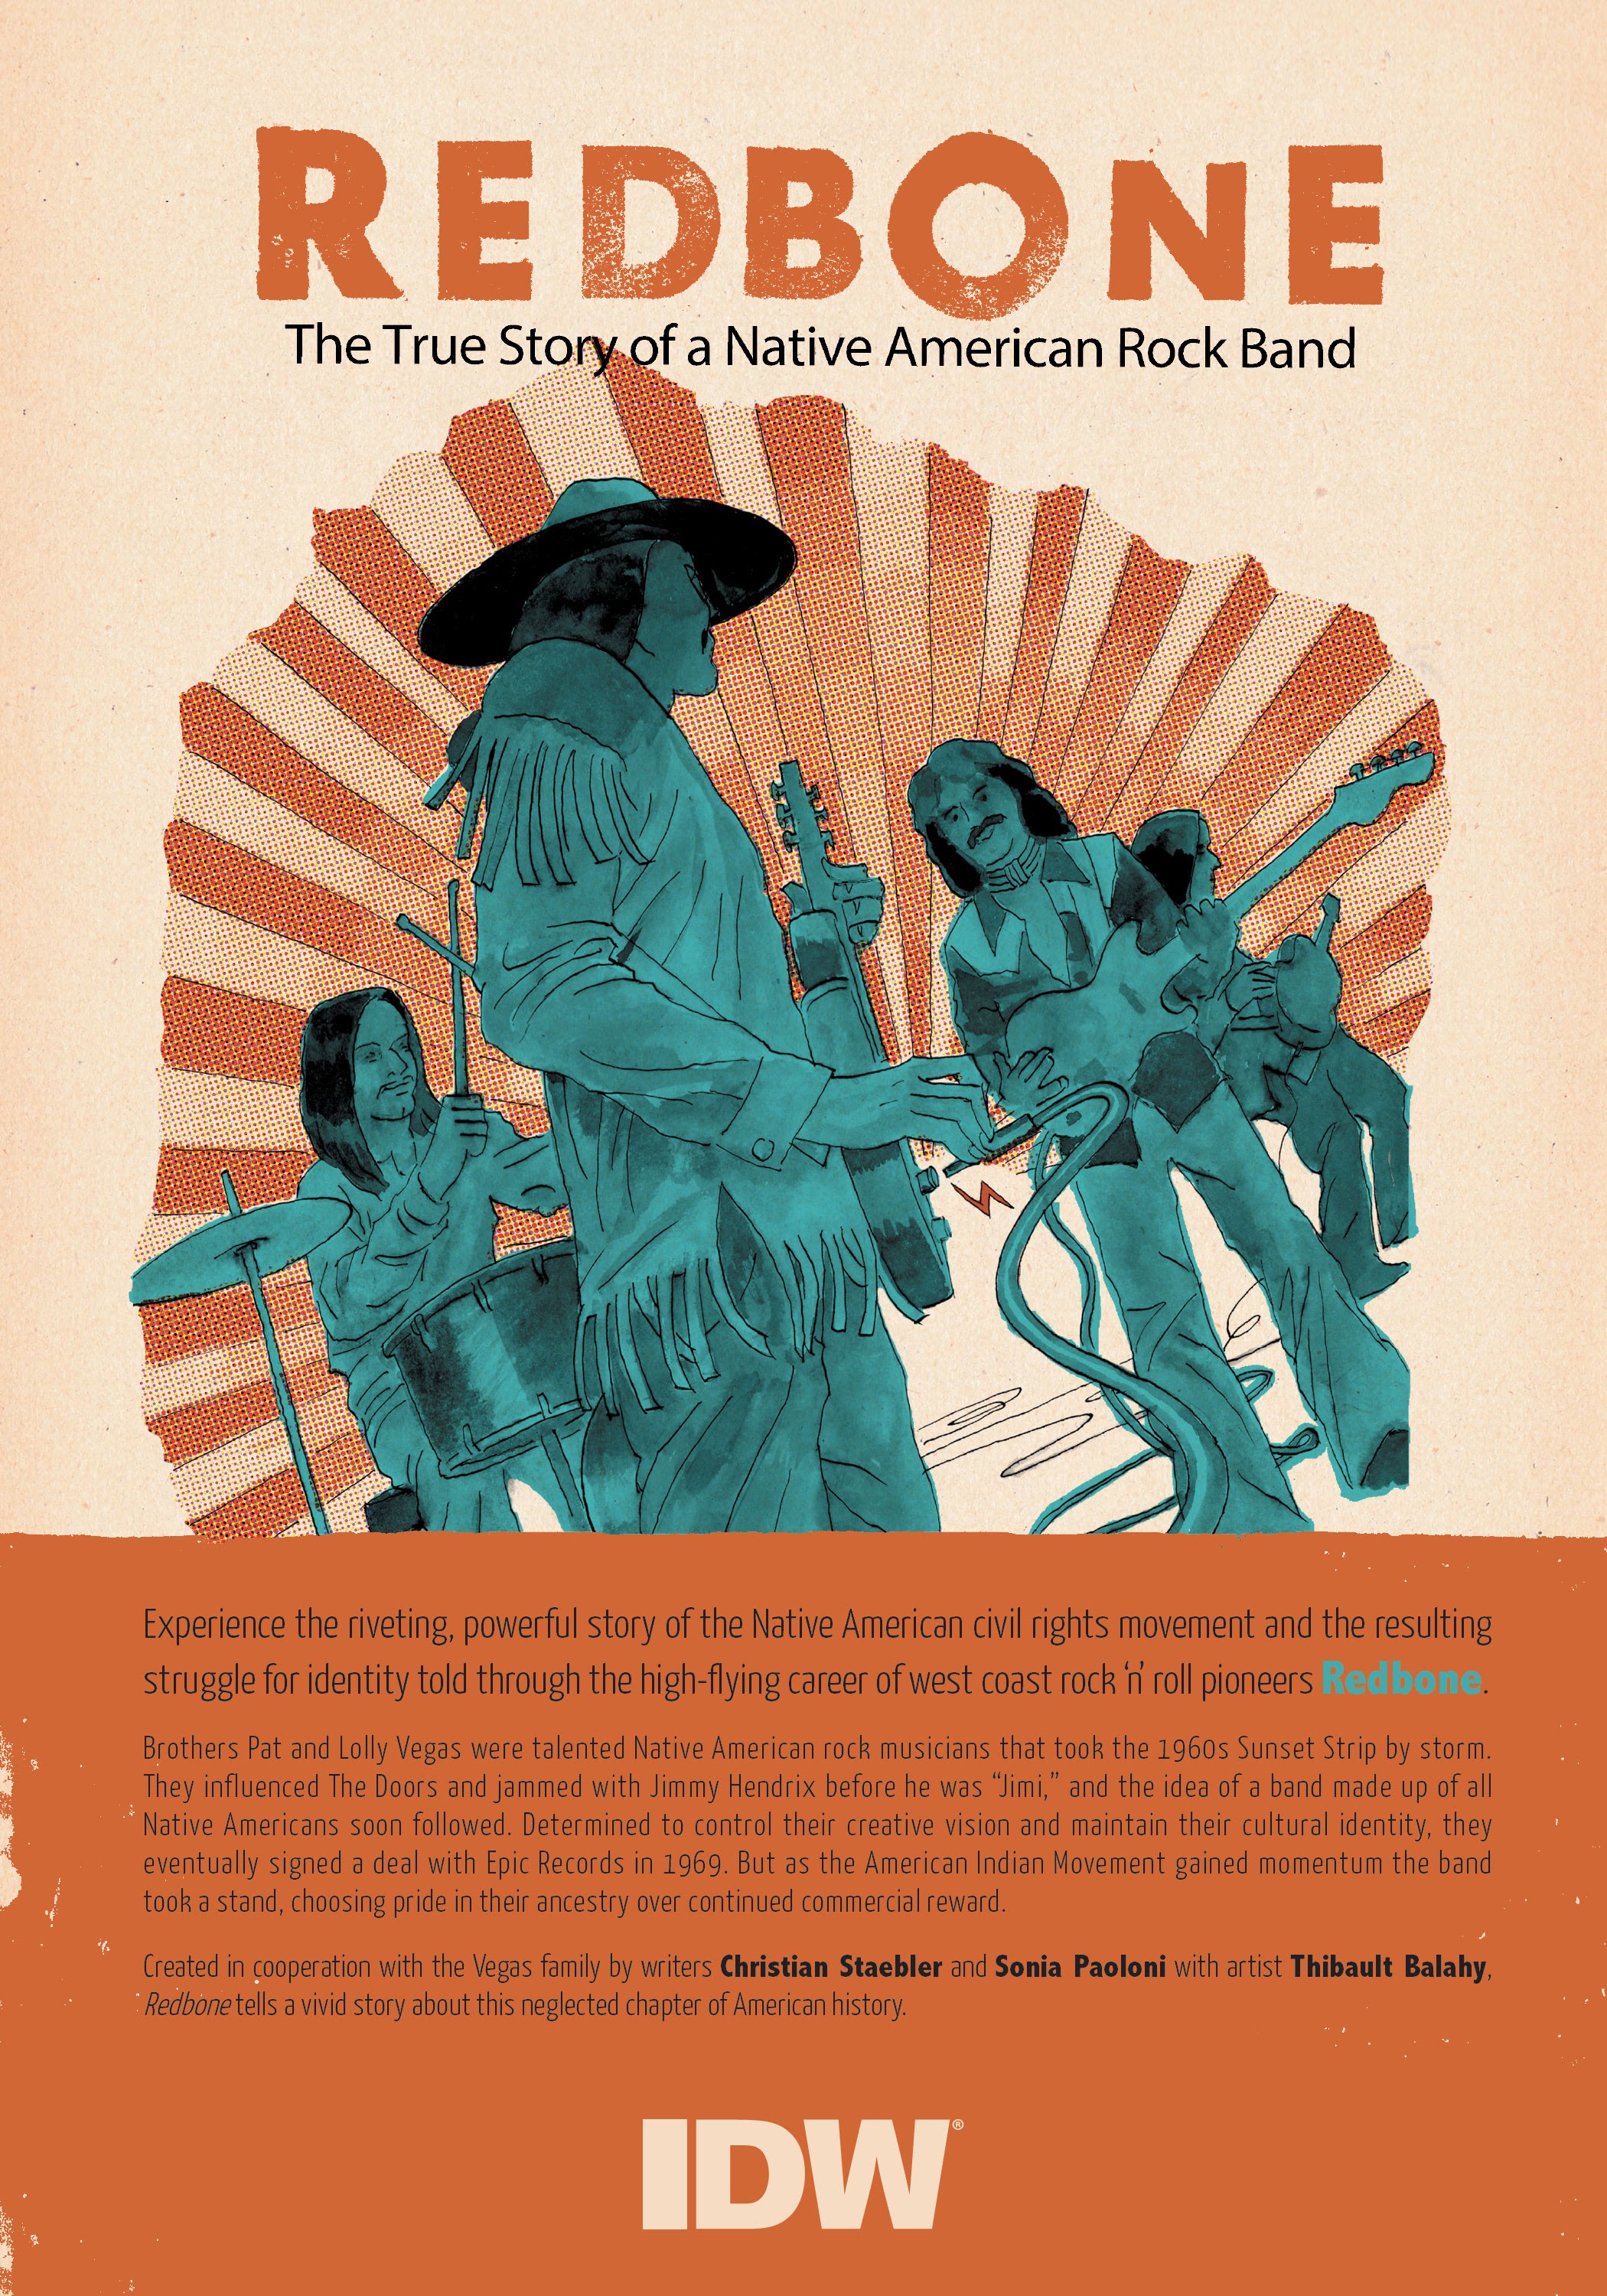 Read online Redbone: The True Story of A Native American Rock Band comic -  Issue # TPB - 140